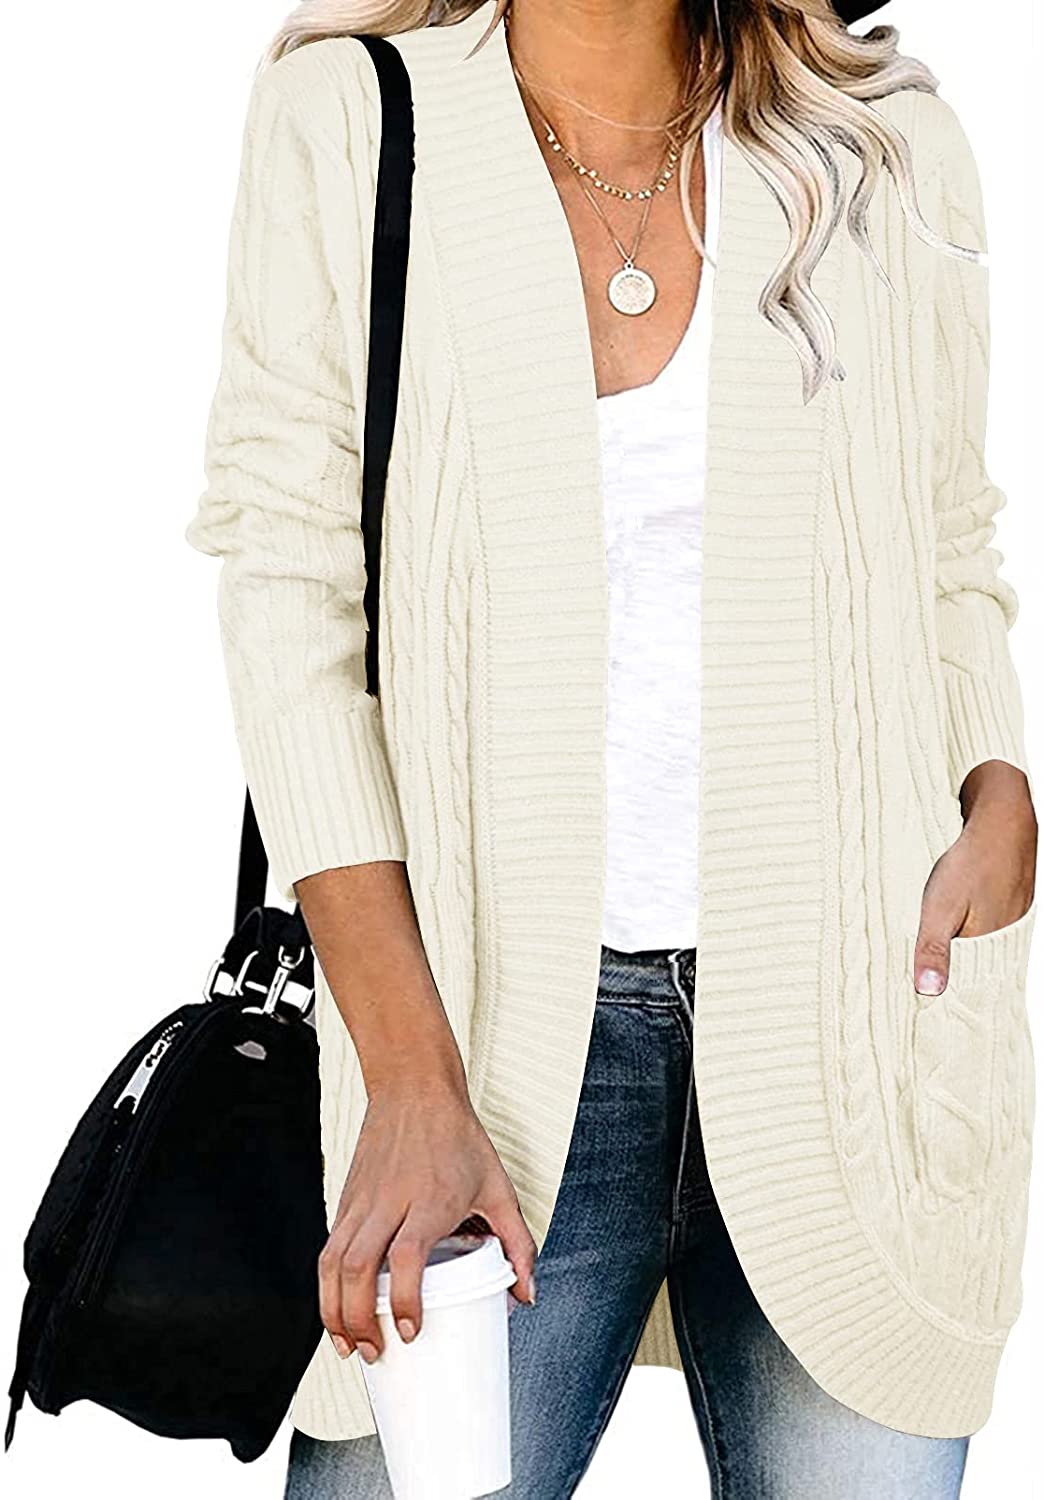 LEANI Women’s Long Sleeve Cable Knit Cardigans Open Front Loose Sweater Outwear